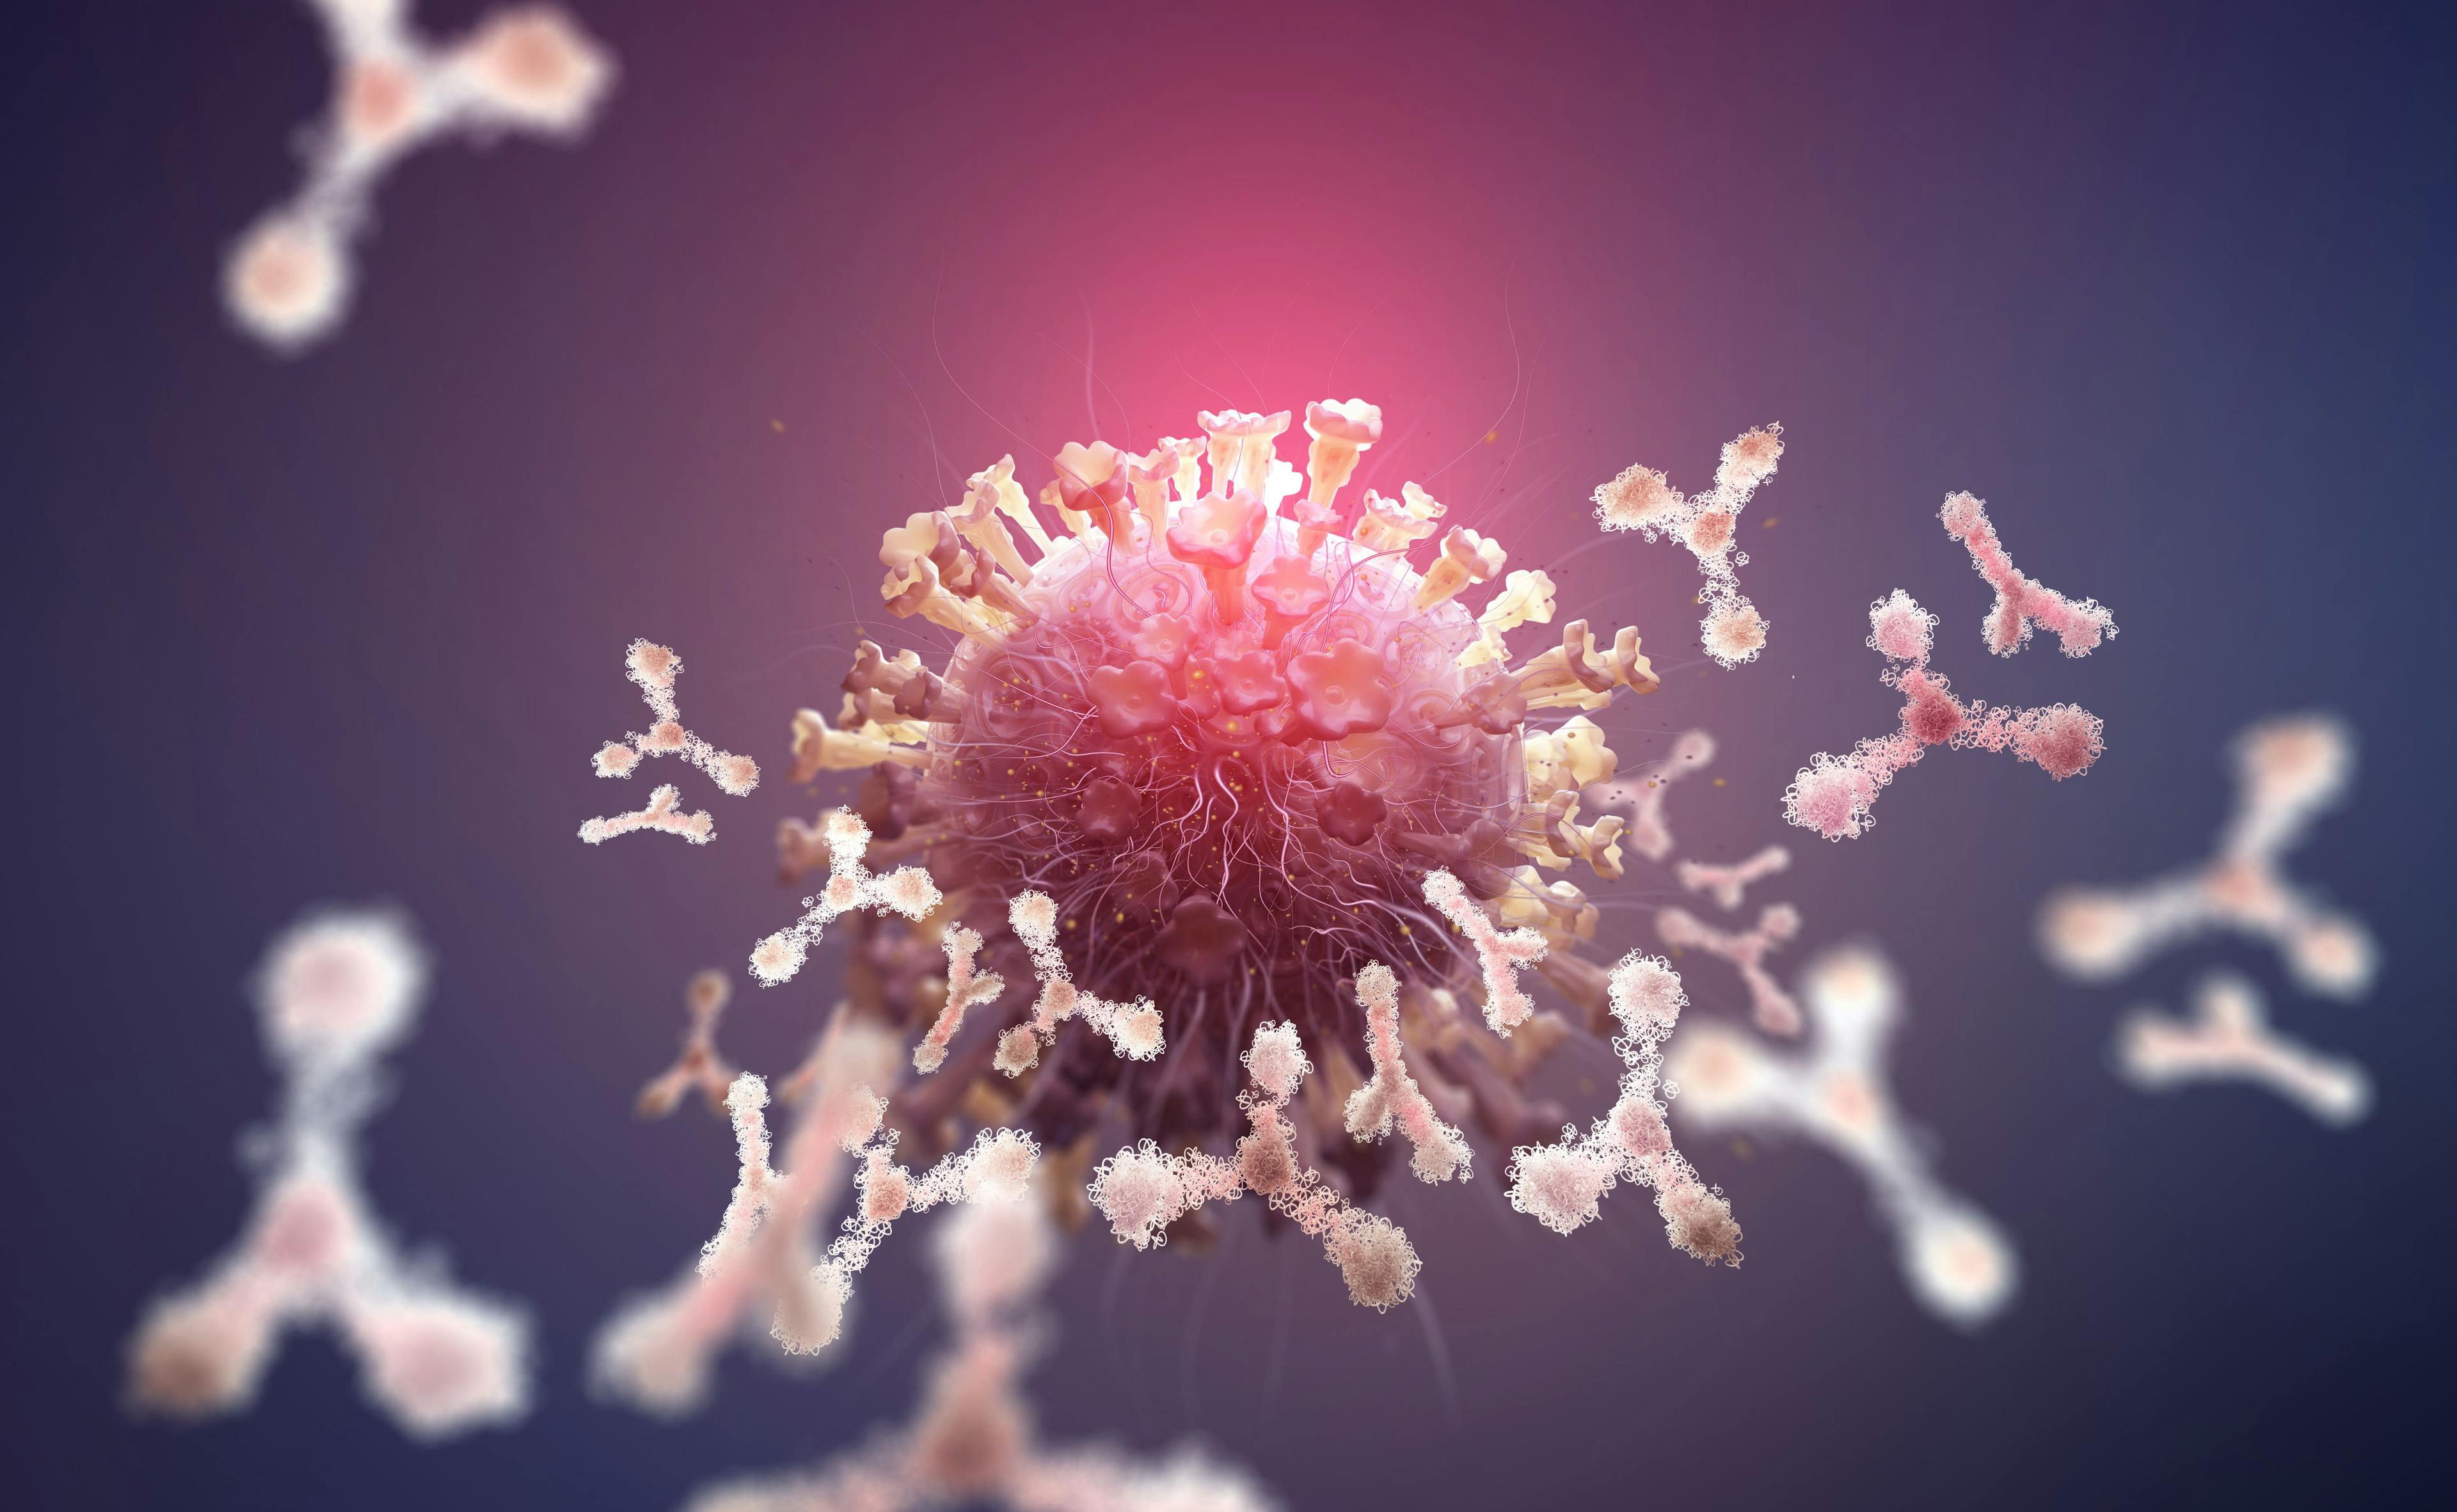 Virus protection. Antibodies and viral infection. Immune defense of the body. Attack on antigens 3D illustration | Image Credit: © Siarhei - stock.adobe.com